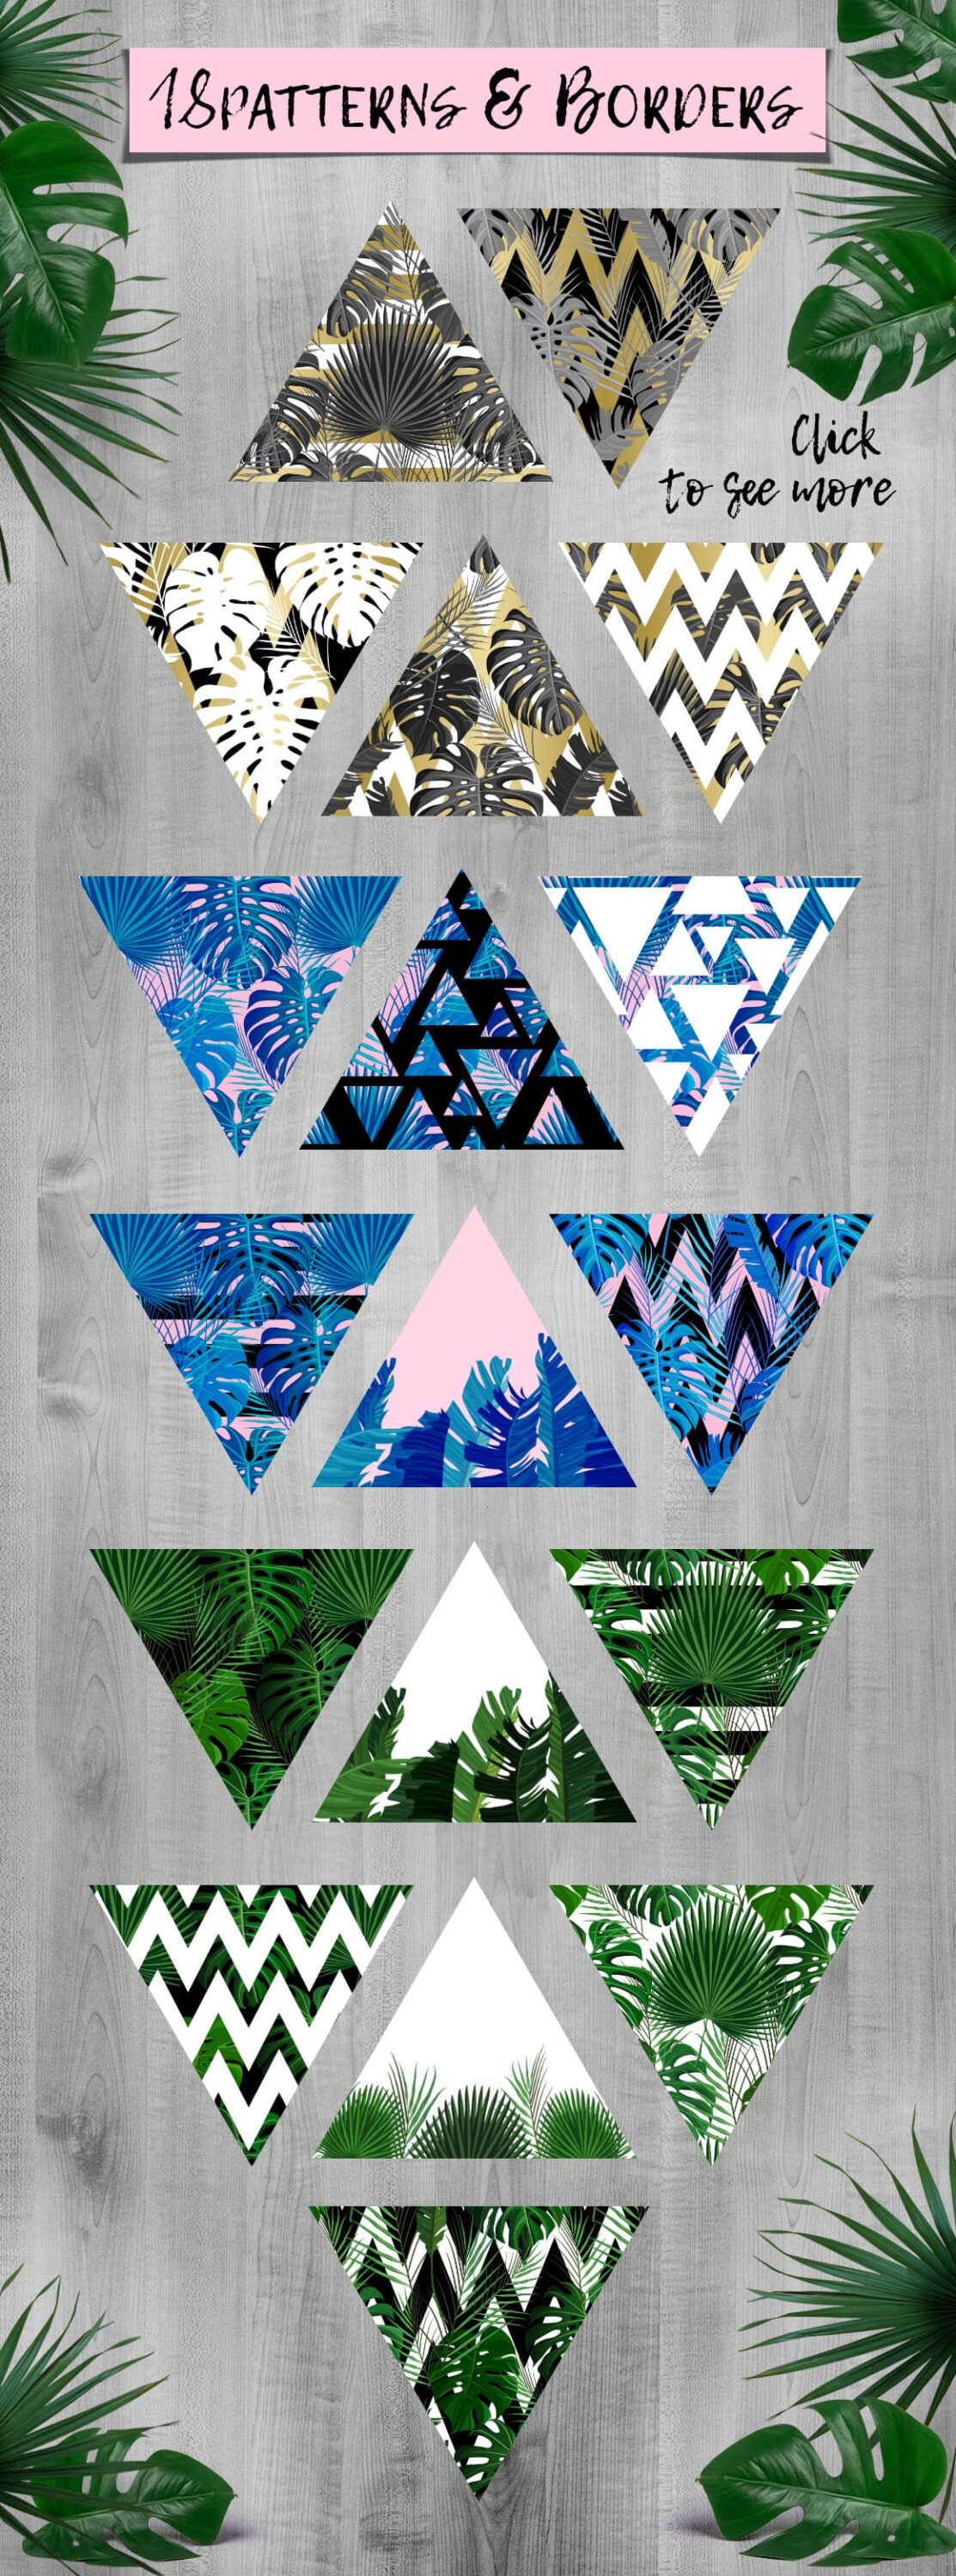 Geometric patterns and borders in different colors.